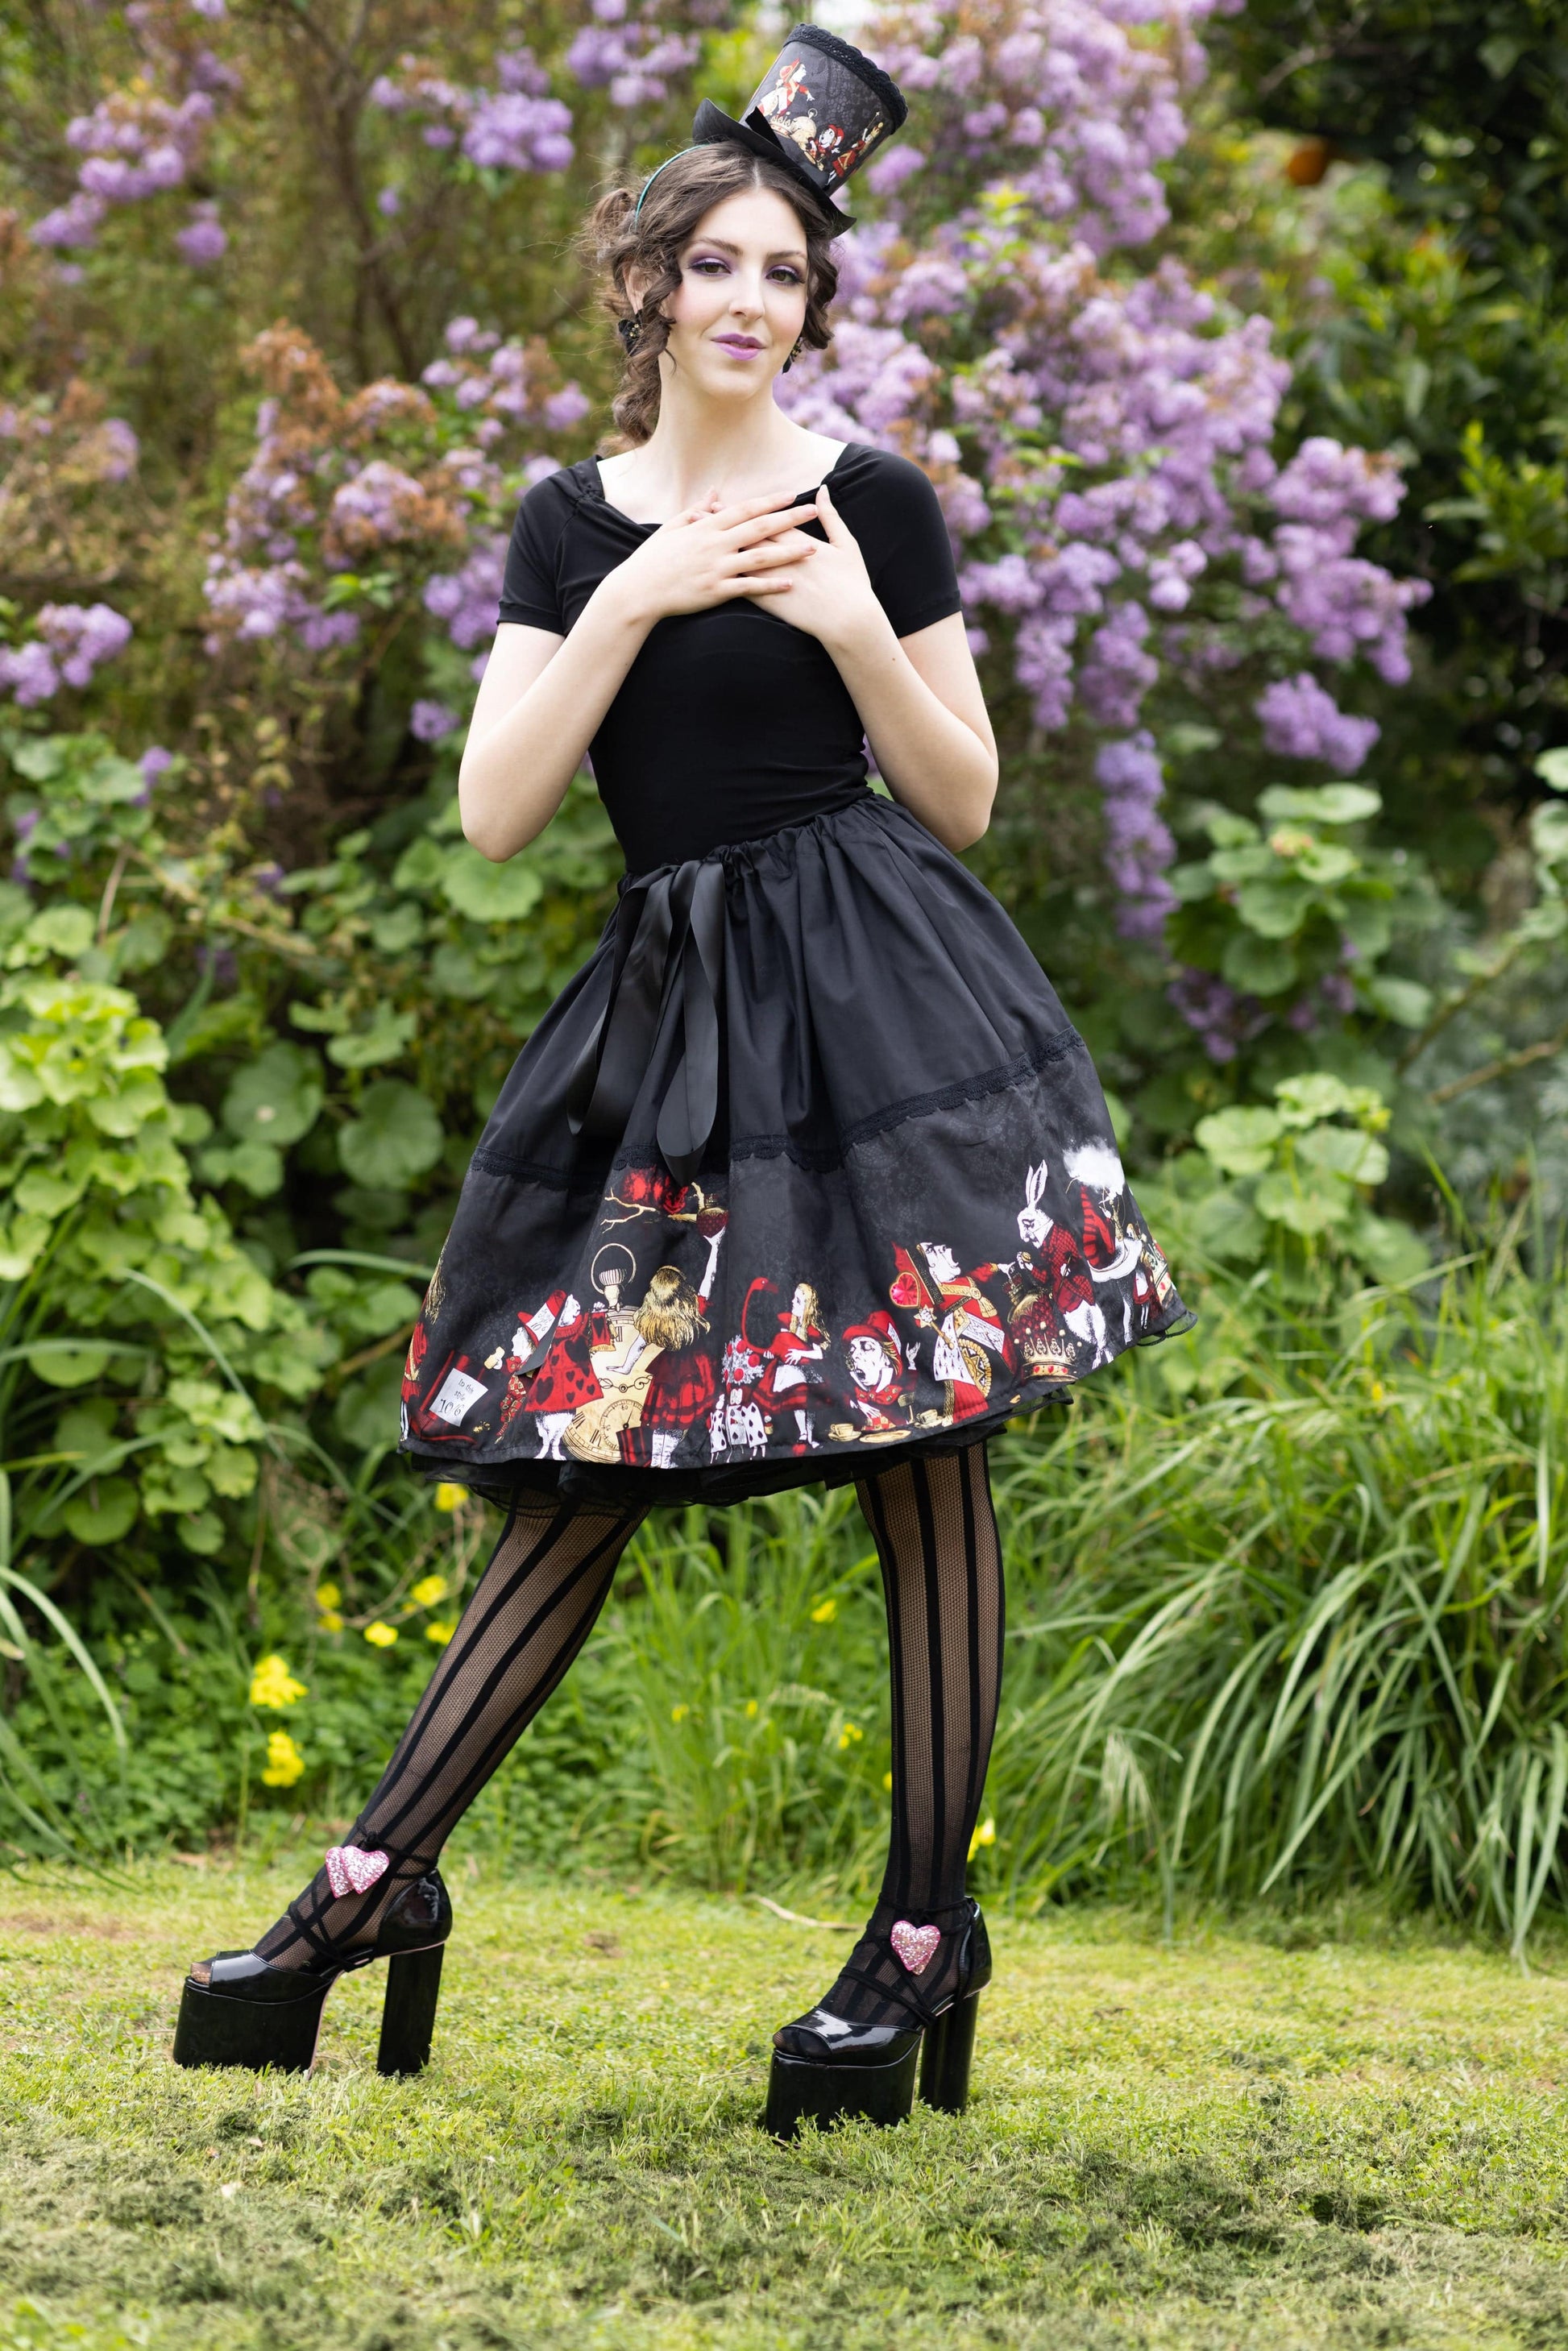 Florencia Inferno modelling the Red Gold Black Alice in Wonderland mid length skirt for Gallery Serpentine